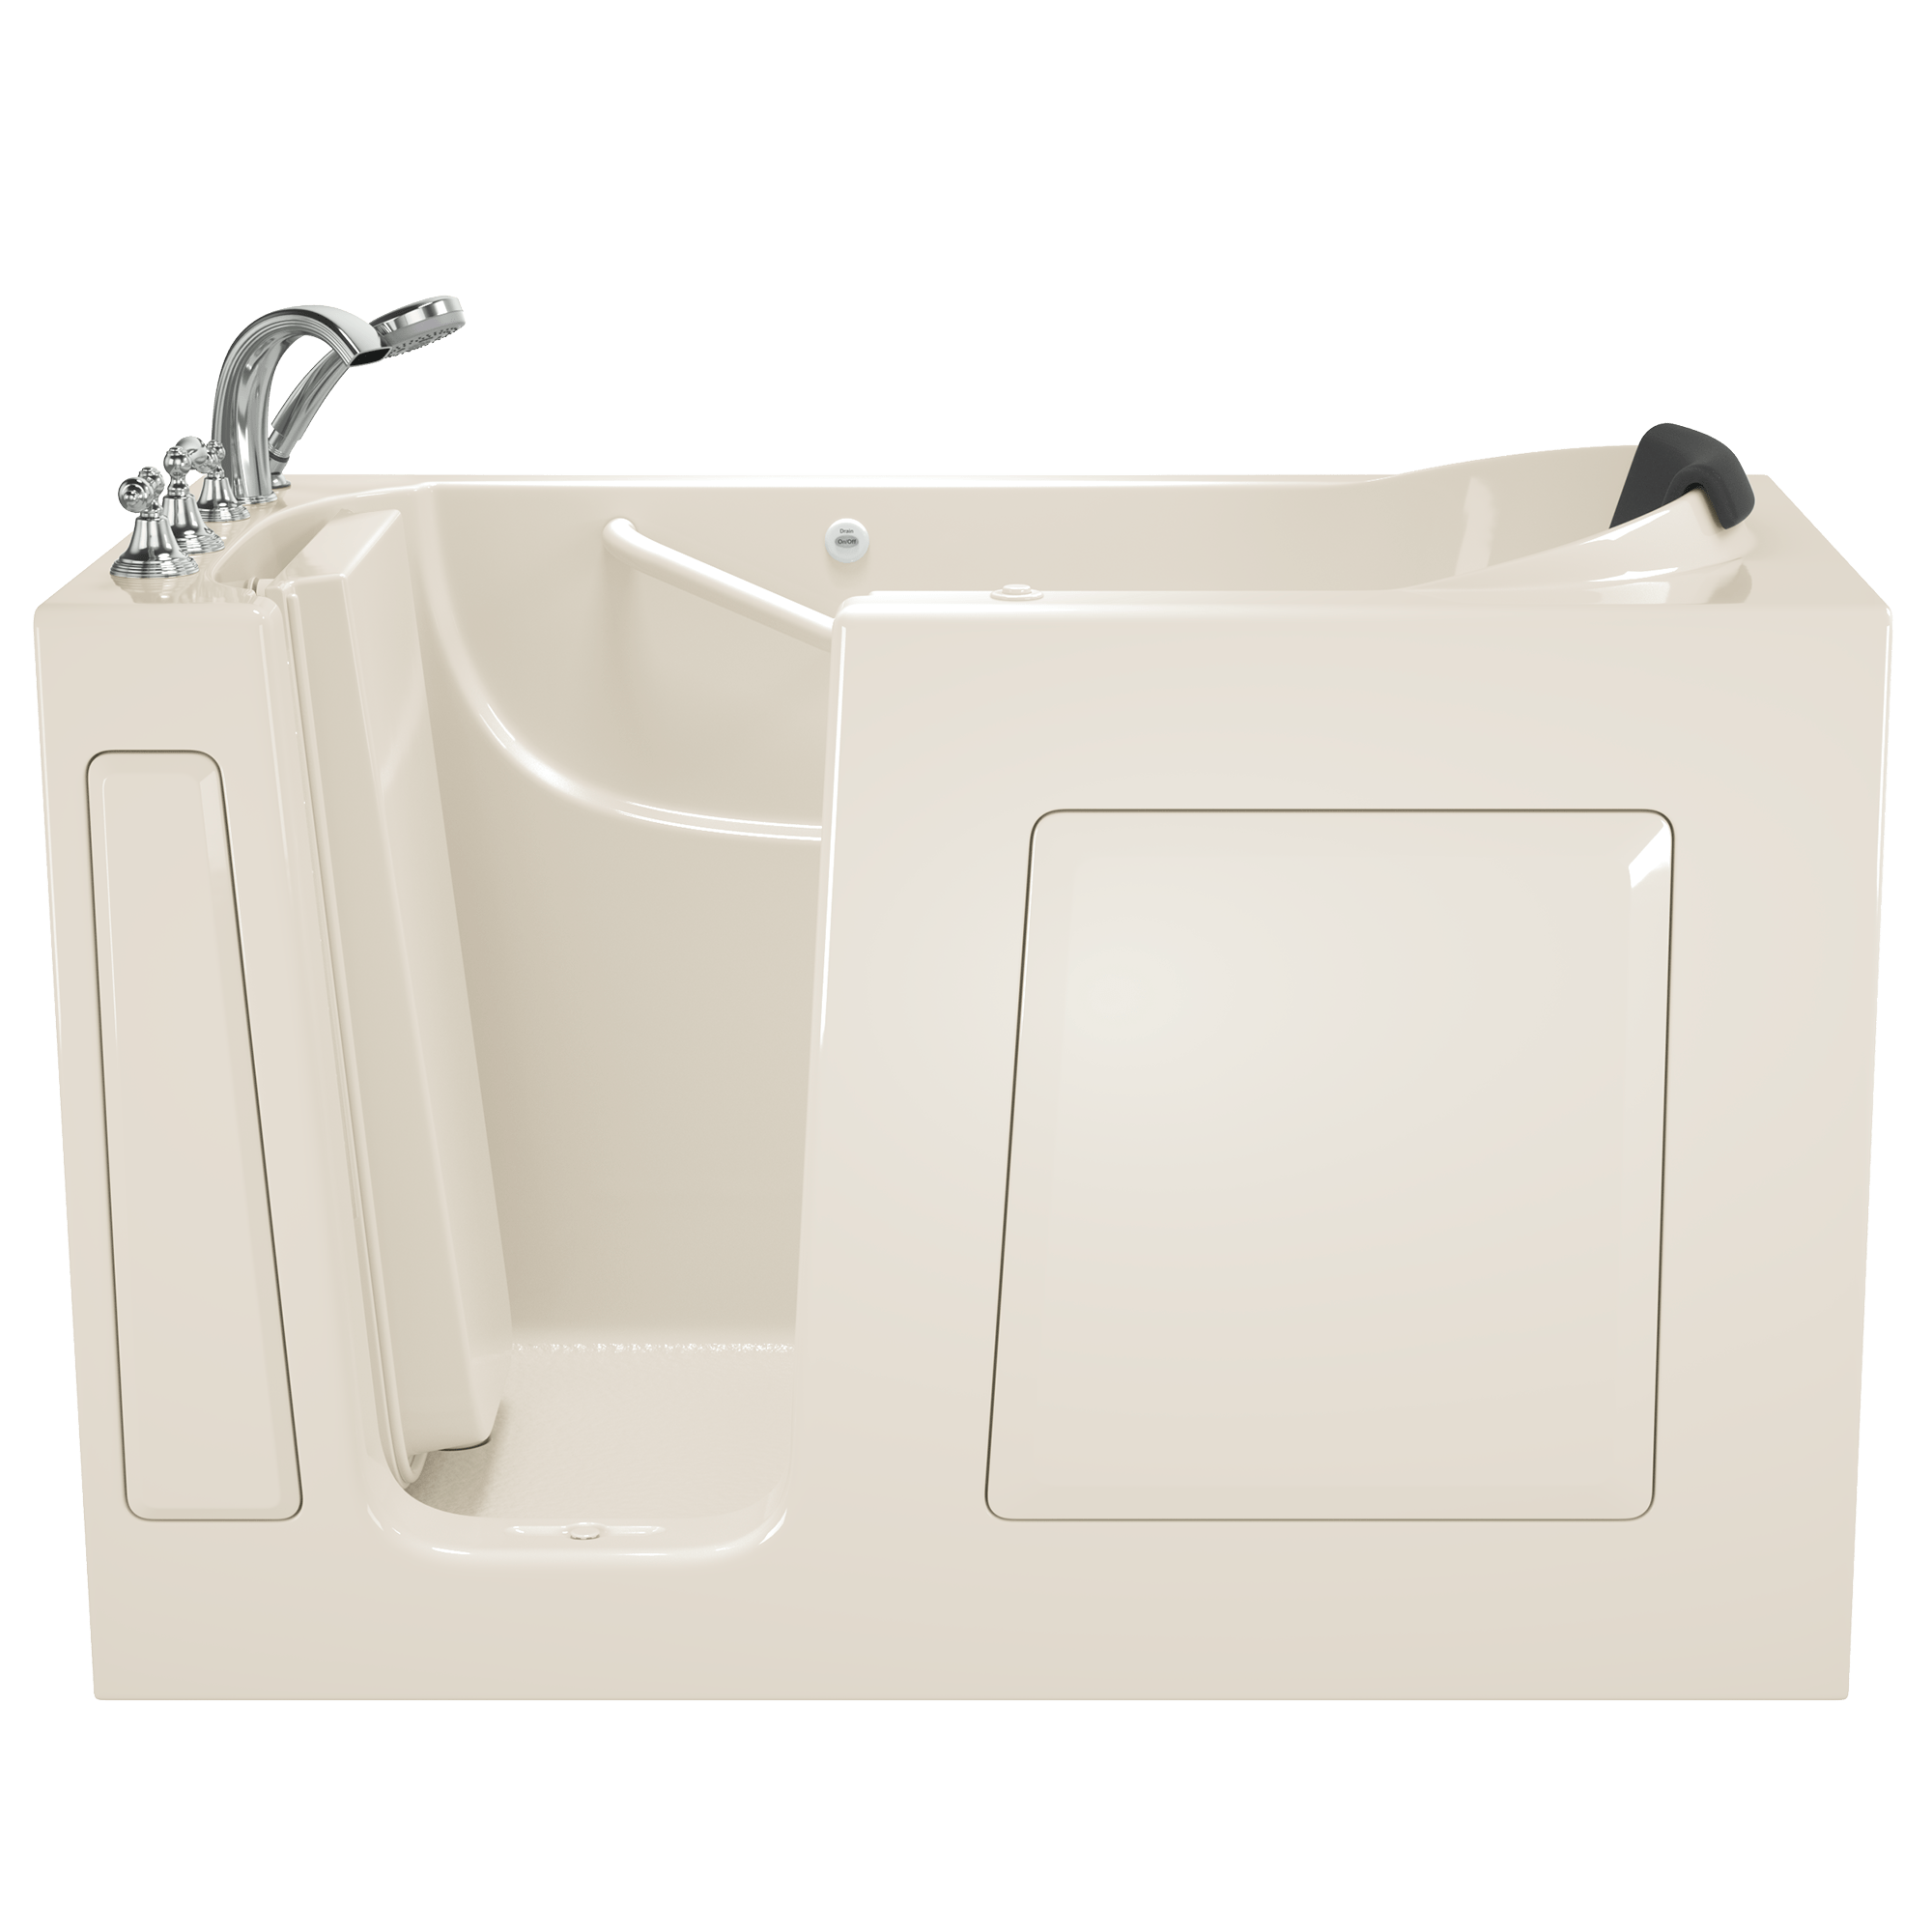 Gelcoat Premium Series 30 x 60 -Inch Walk-in Tub With Whirlpool System - Left-Hand Drain With Faucet